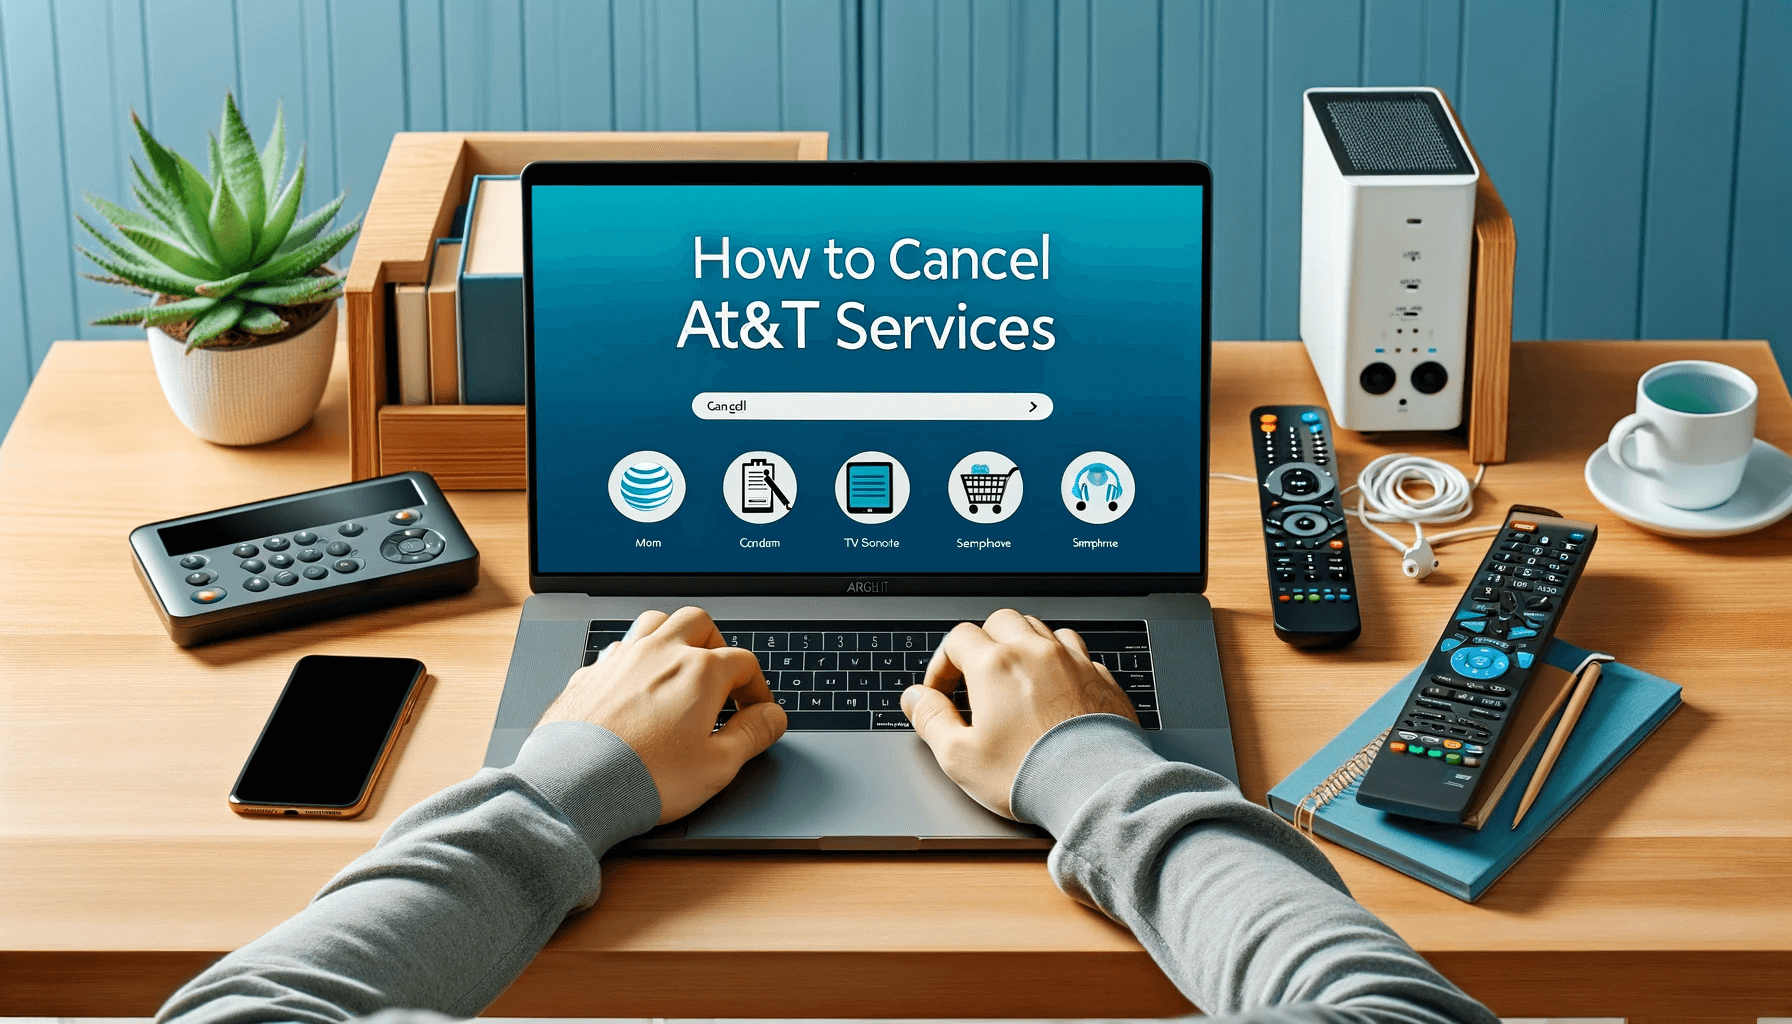 How to Cancel AT&T Services - Internet, Wireless, TV, Phone